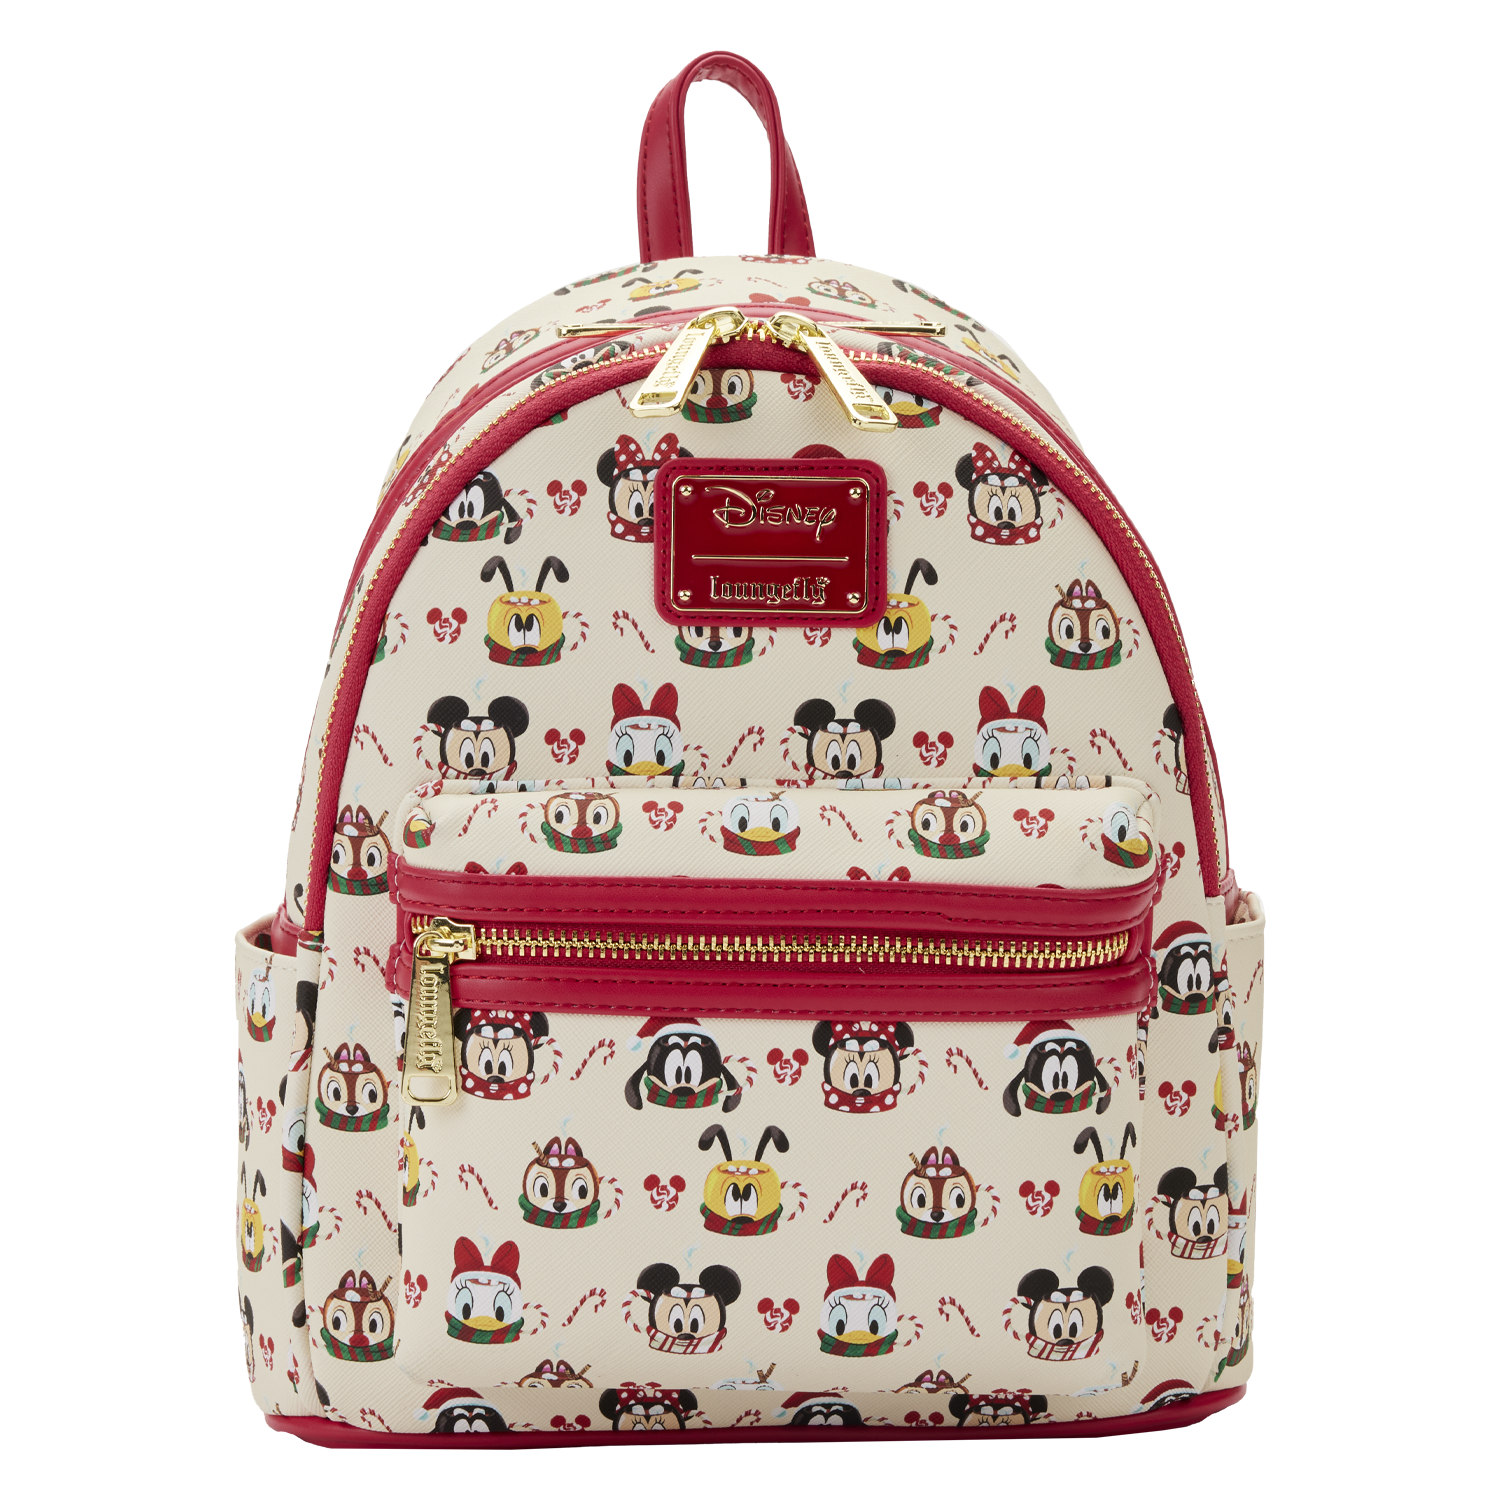 BIOWORLD Mickey Mouse Mini Backpack